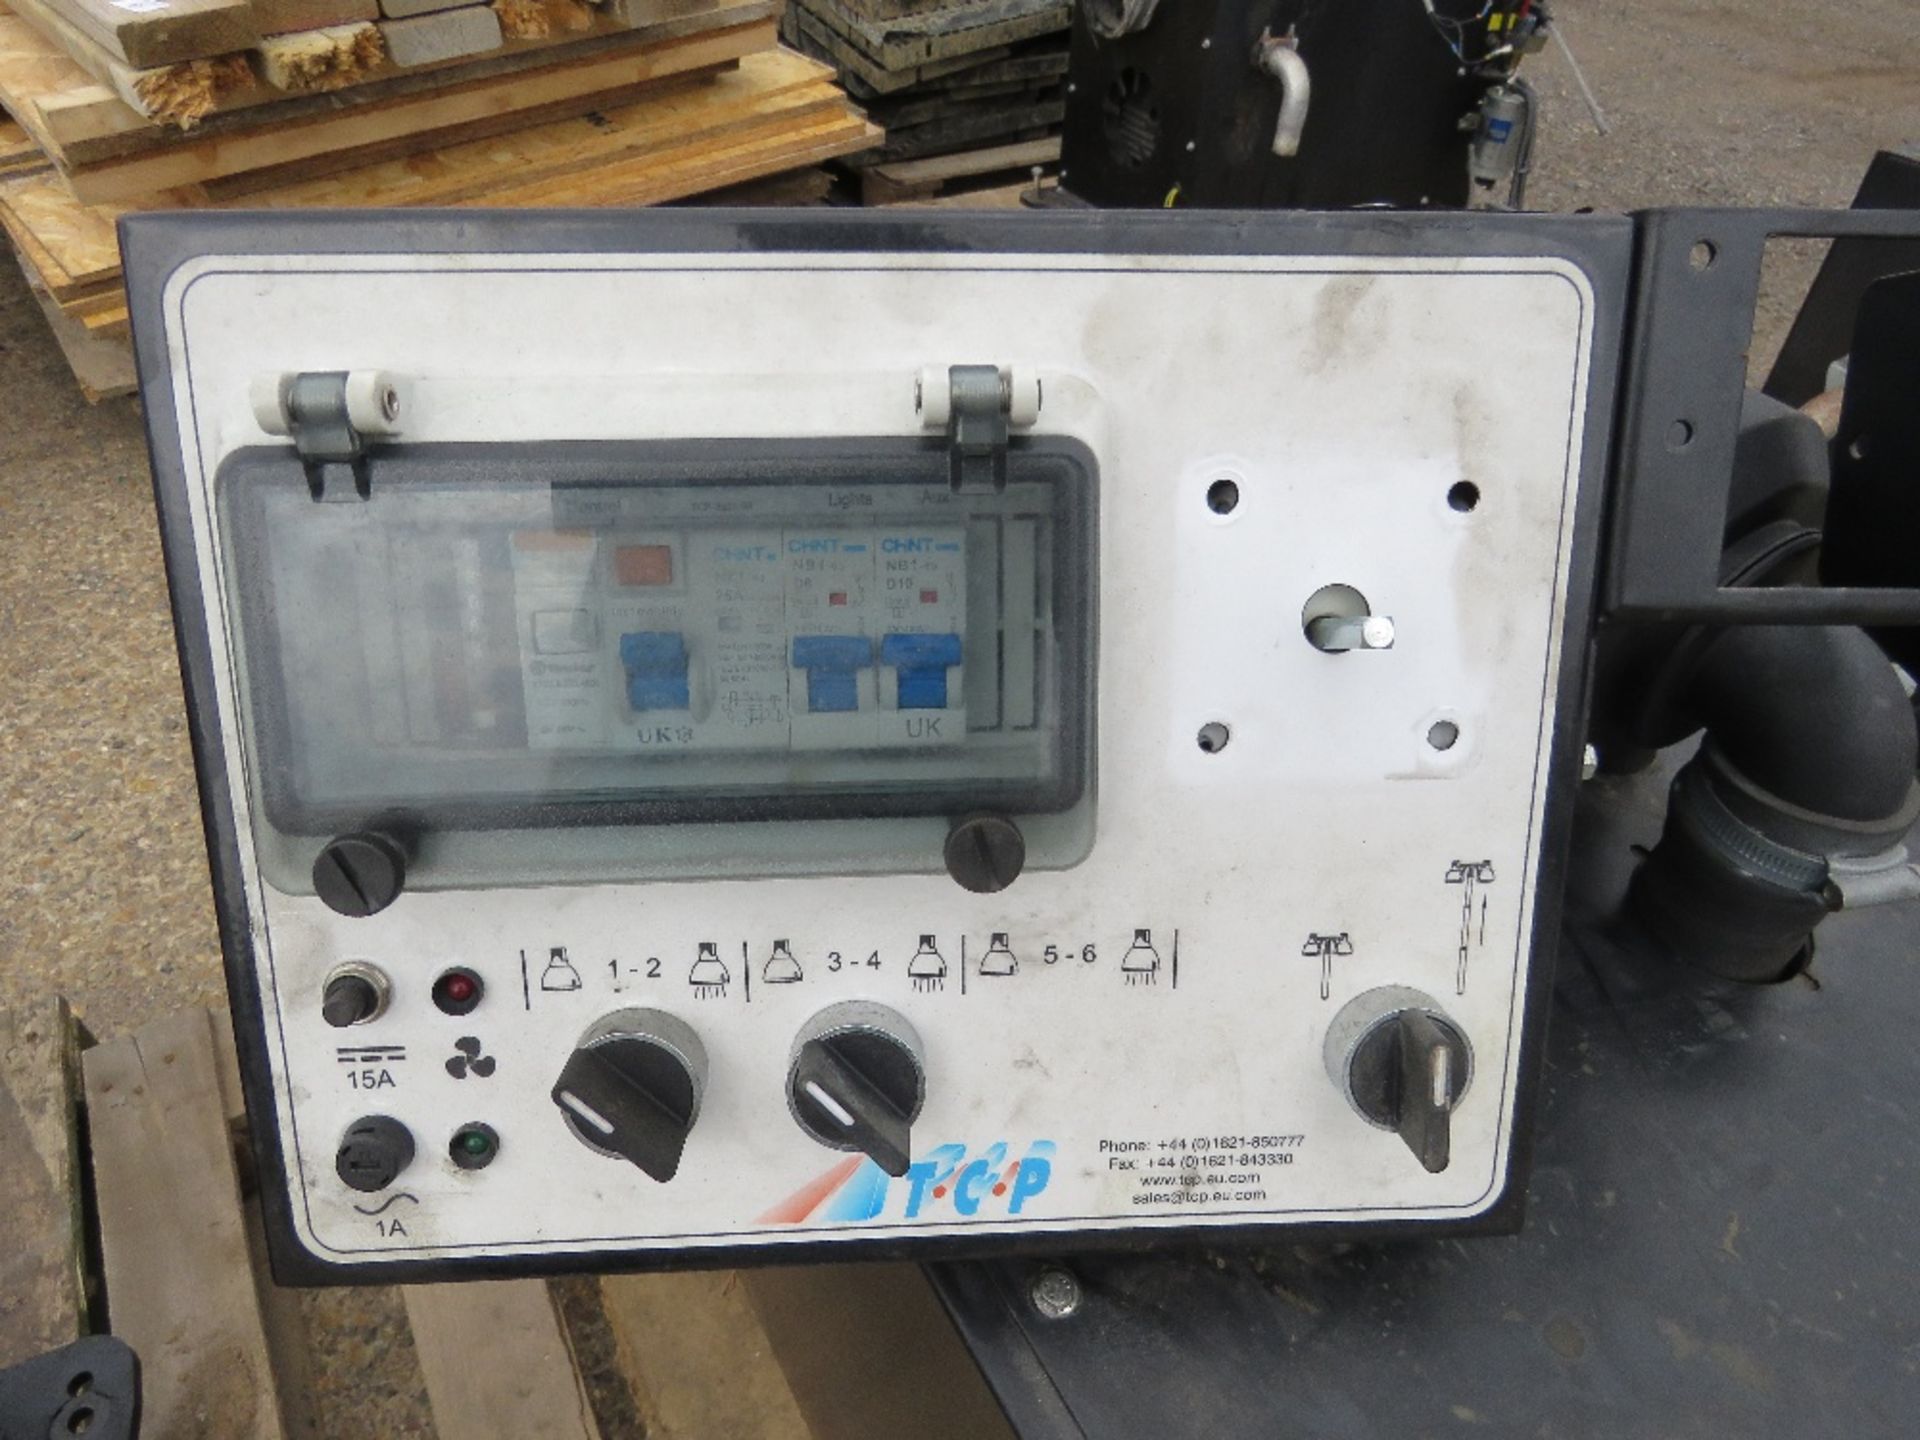 HATZ DIESEL ENGINED PACKAGED GENERATOR SET WITH CONTROL UNIT, 3.1KW RATED OUTPUT. - Image 2 of 6